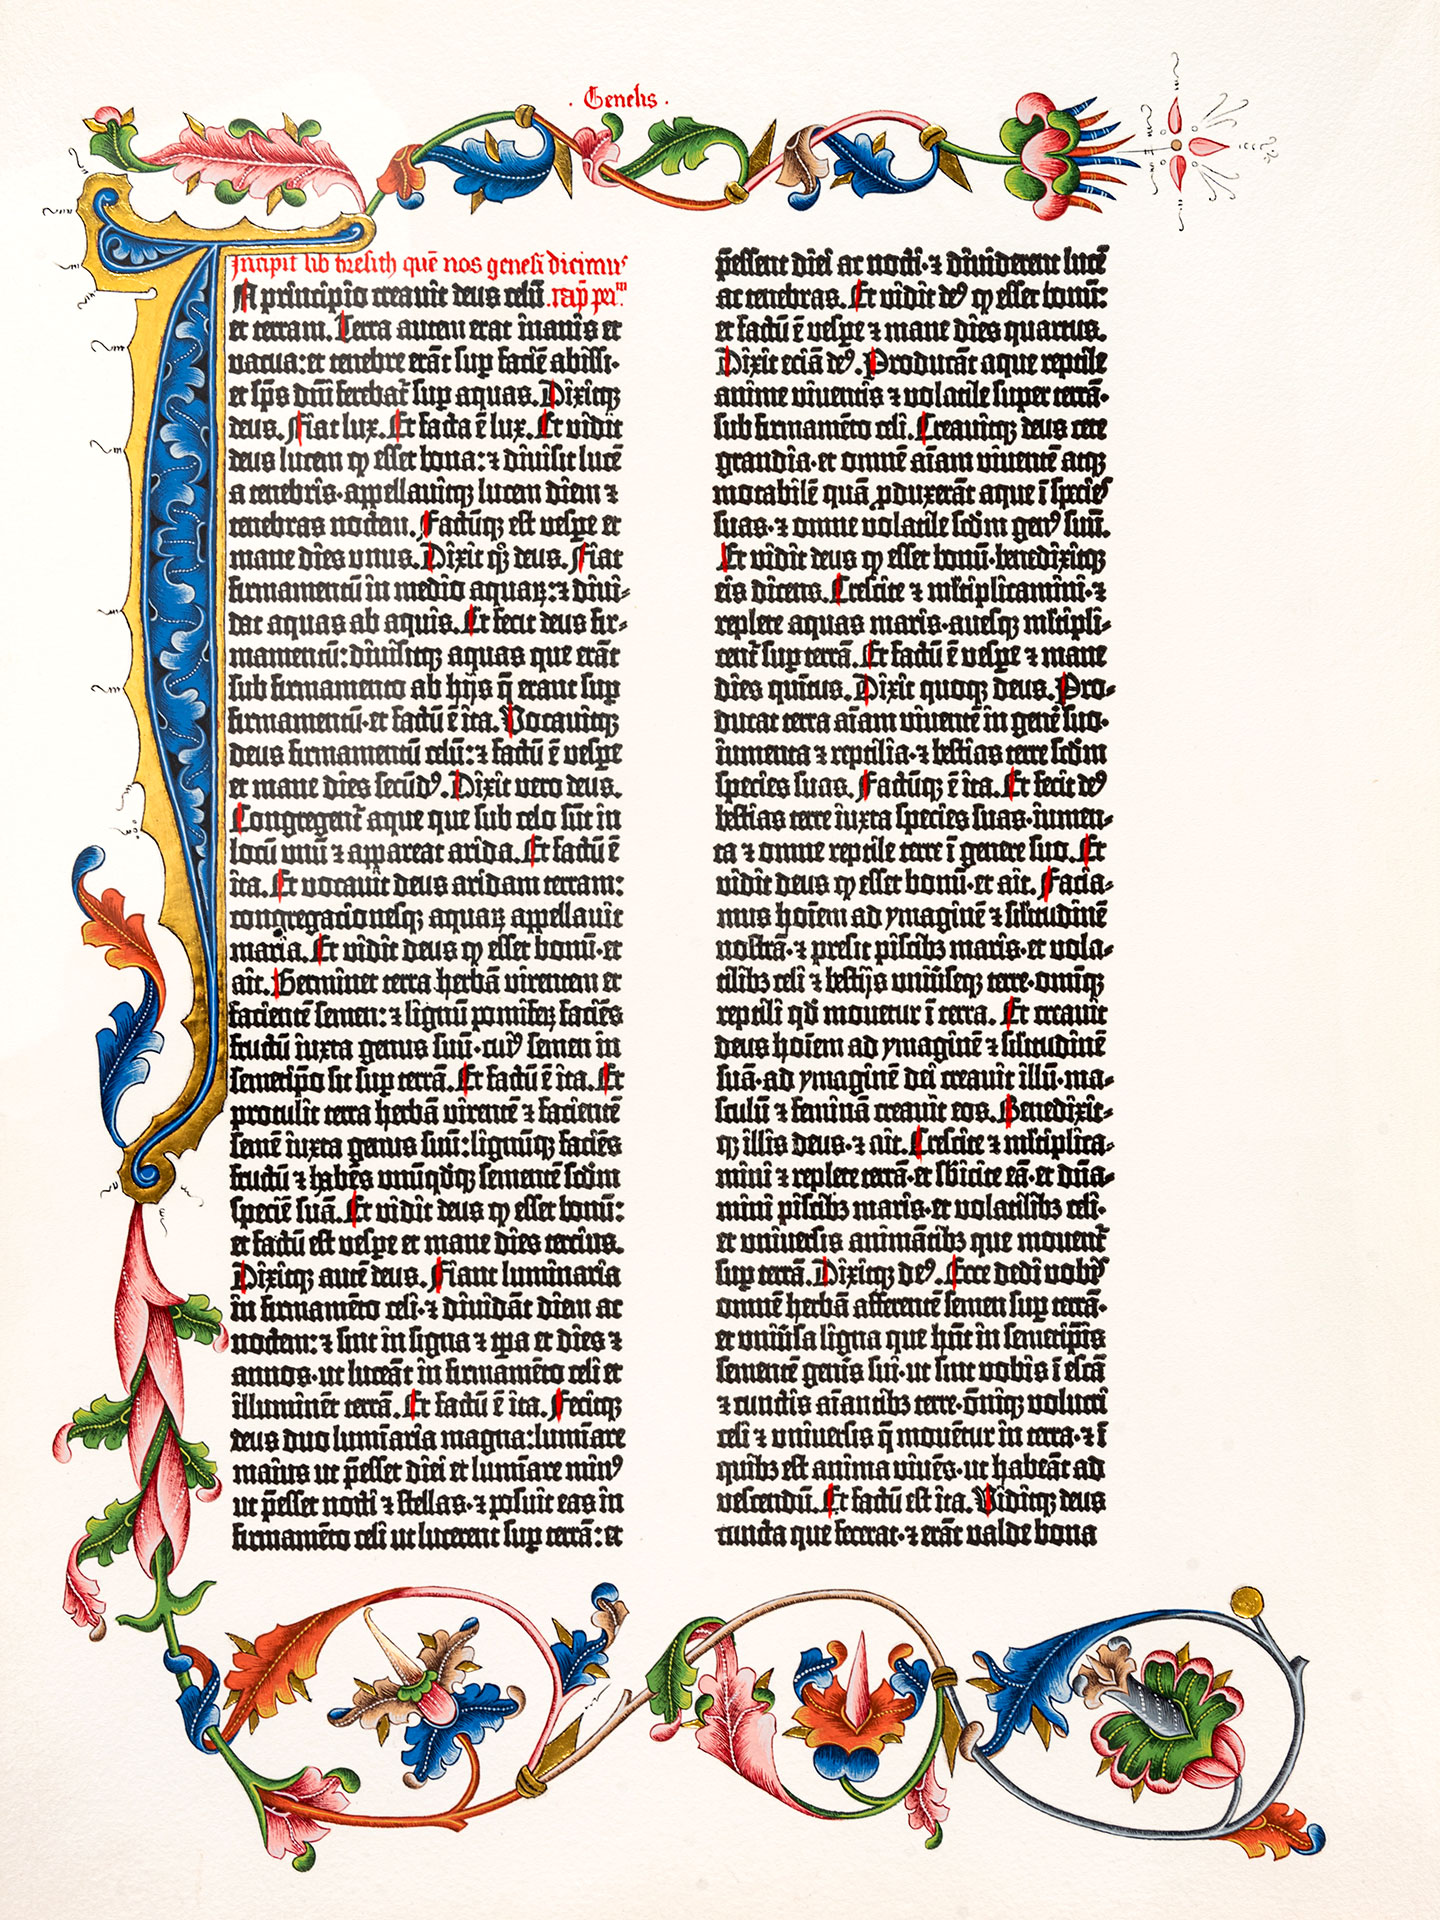 Genesis. Ornamental page from the Göttingen copy of the Gutenberg Bible